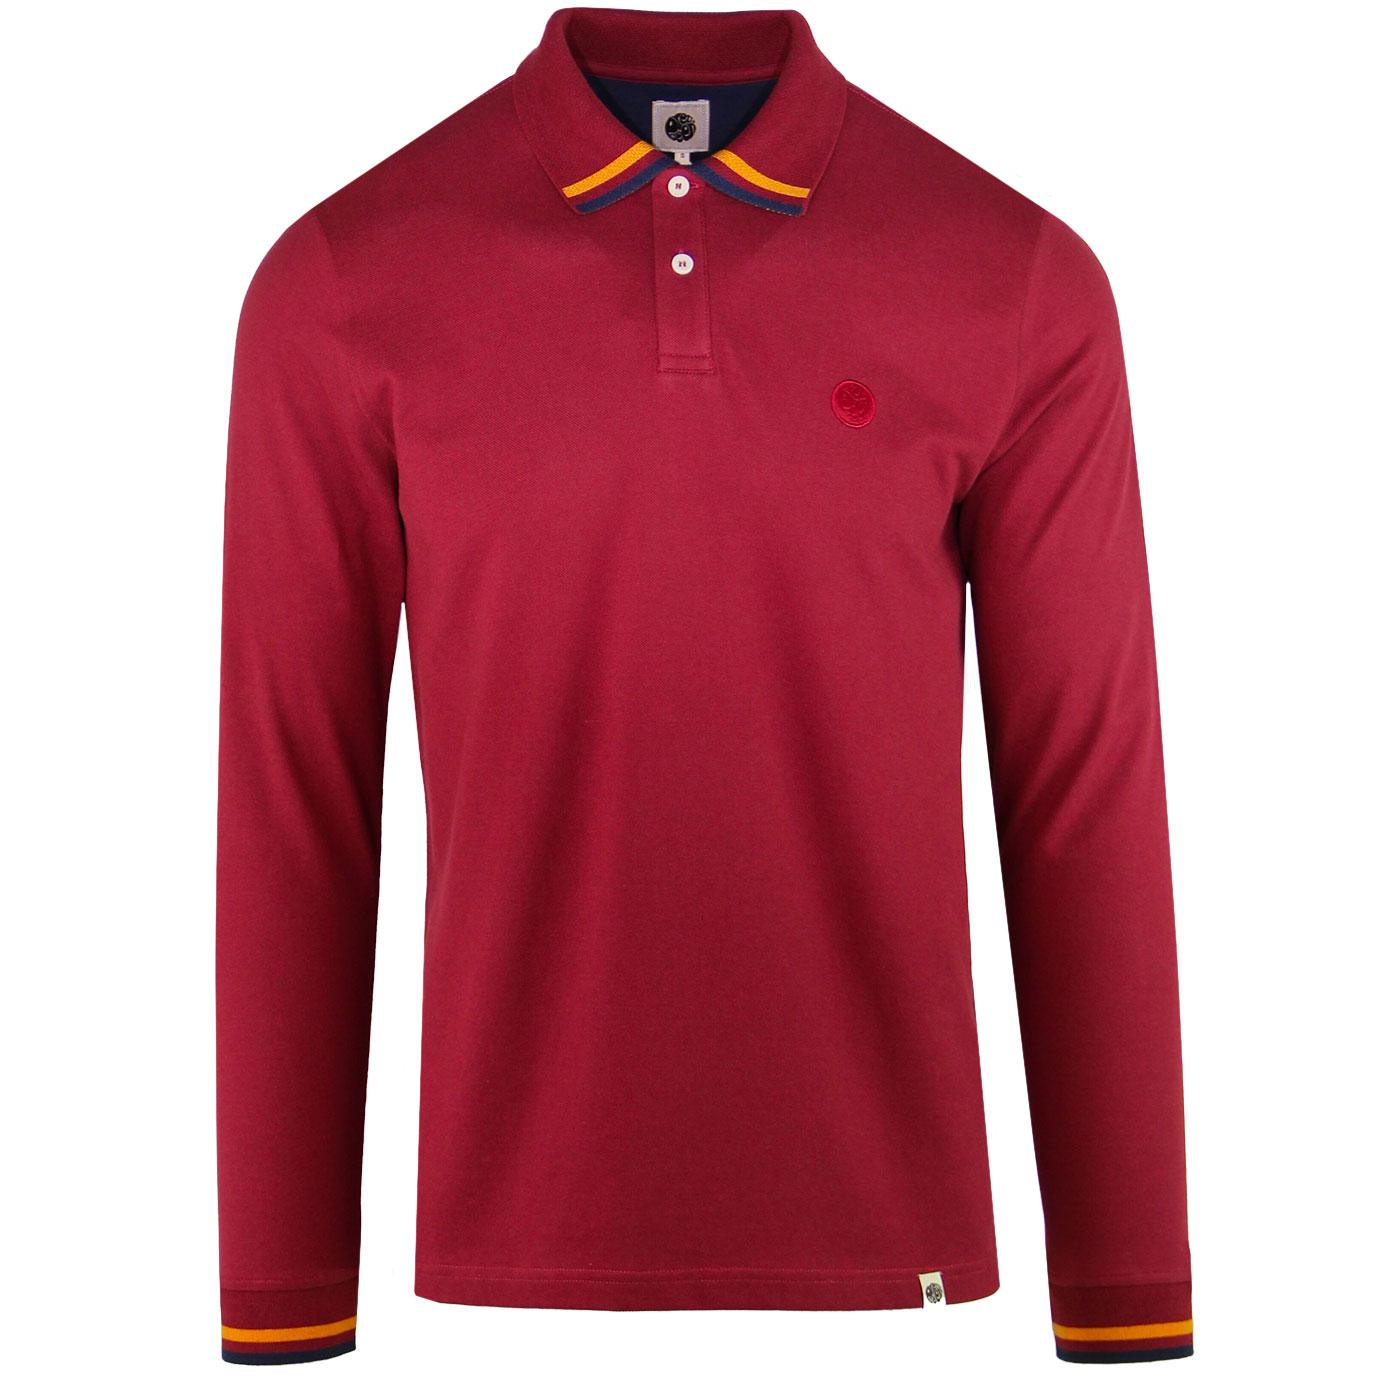 PRETTY GREEN Tipped Long Sleeve Mod Polo Shirt in Red